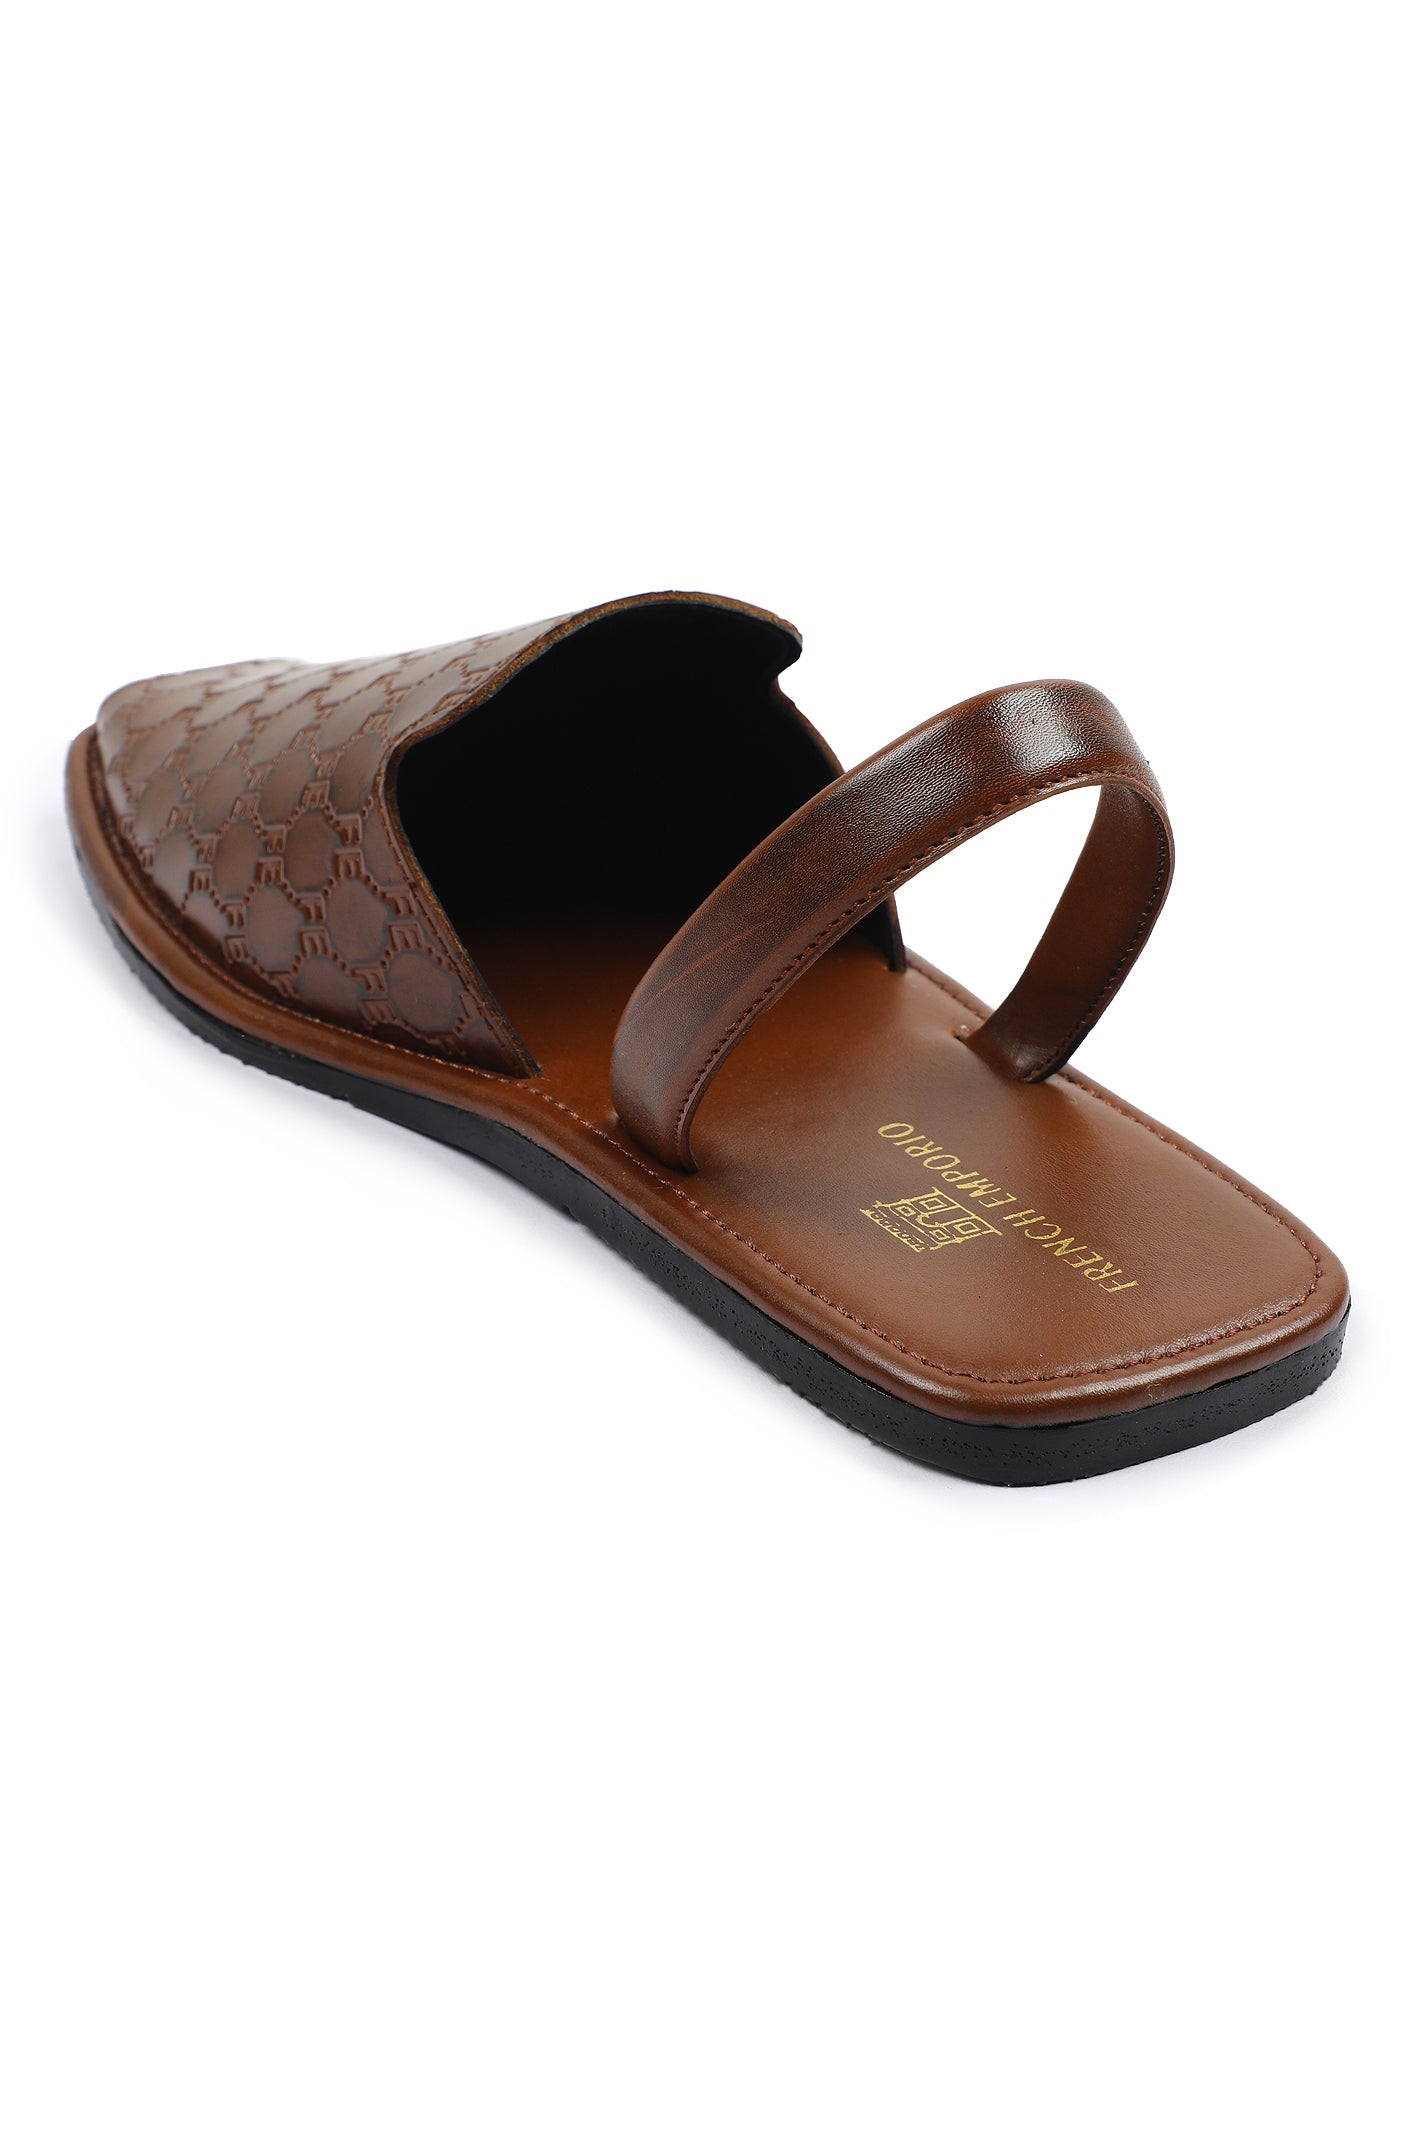 French Emporio Men's Sandal SKU: SLD-0039-BROWN - Diners